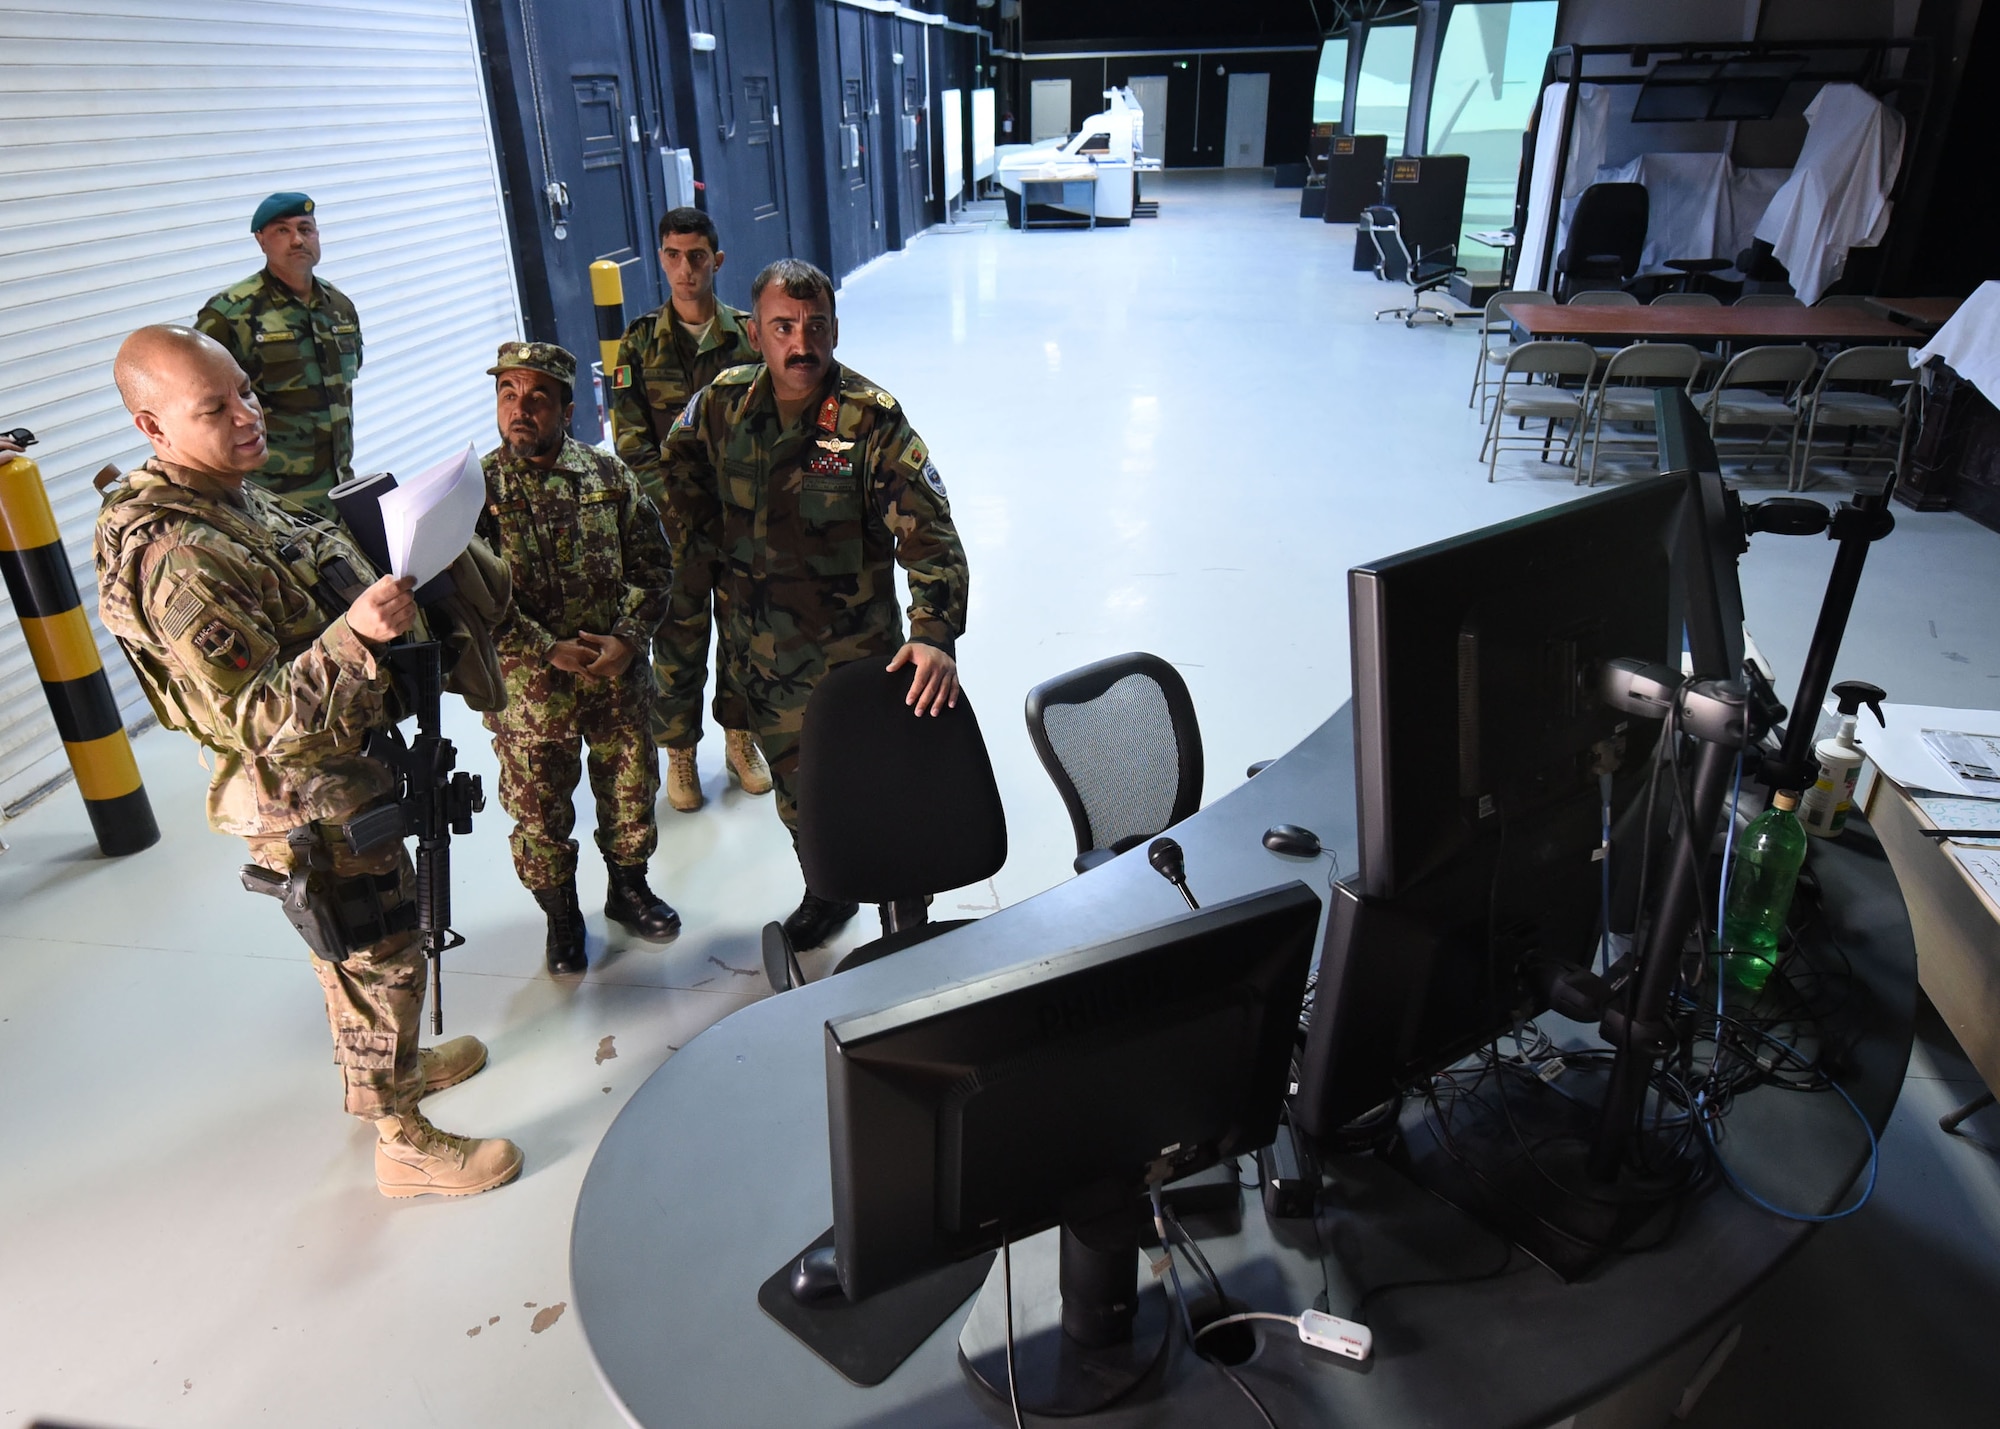 Lt. Col. Jose Lasso, Train, Advise, Assist Command-Air (TAAC-Air) deputy director of logistics, receives a tour of a flight simulator training facility from Afghan Air Force Brig. Gen. Abdul Qudratullah, Shindand Air Wing commander, at Herat, Afghanistan, March 1, 2017. This visit was an opportunity for advisors to have face-to-face interaction with their AAF counterparts. TAAC-Air headquarters is based out of Kabul, Afghanistan. (U.S. Air Force photo by Tech. Sgt. Veronica Pierce) 